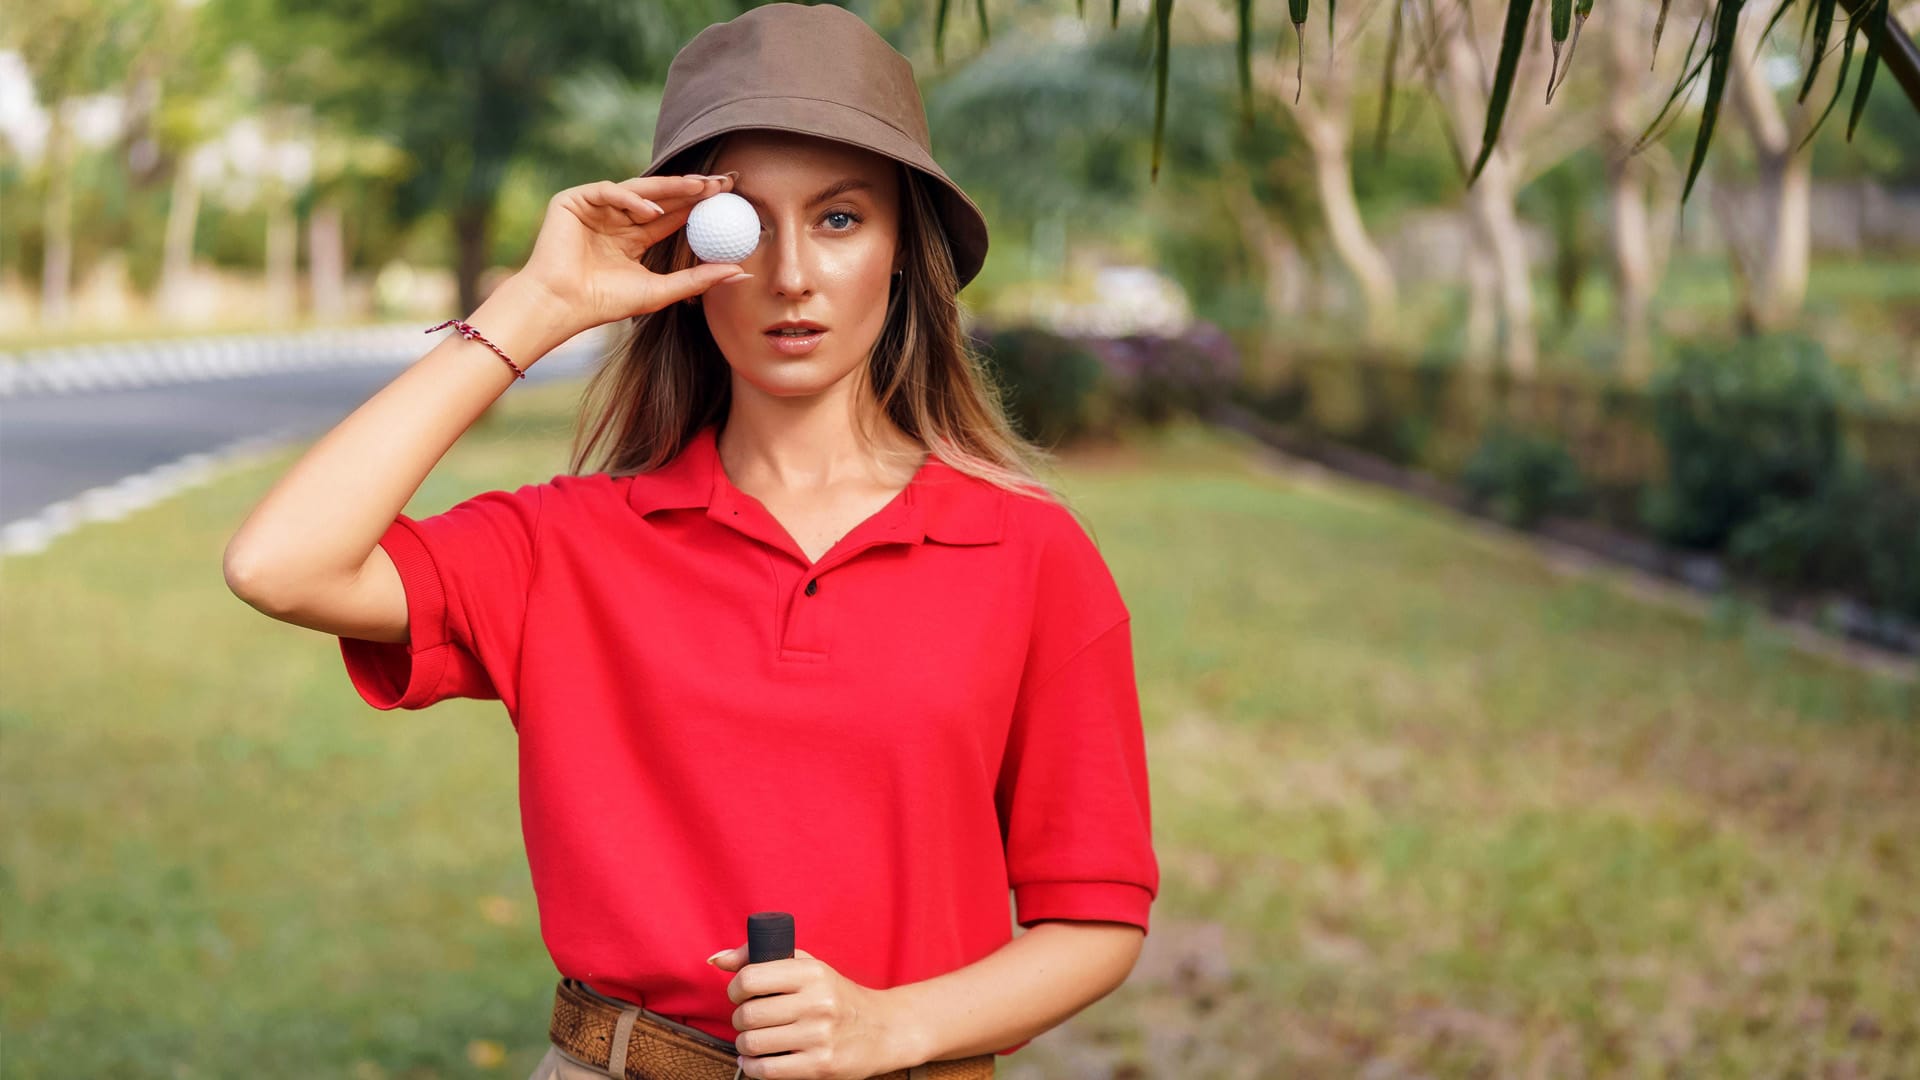 A woman golfer holding a golf ball in front of her eye